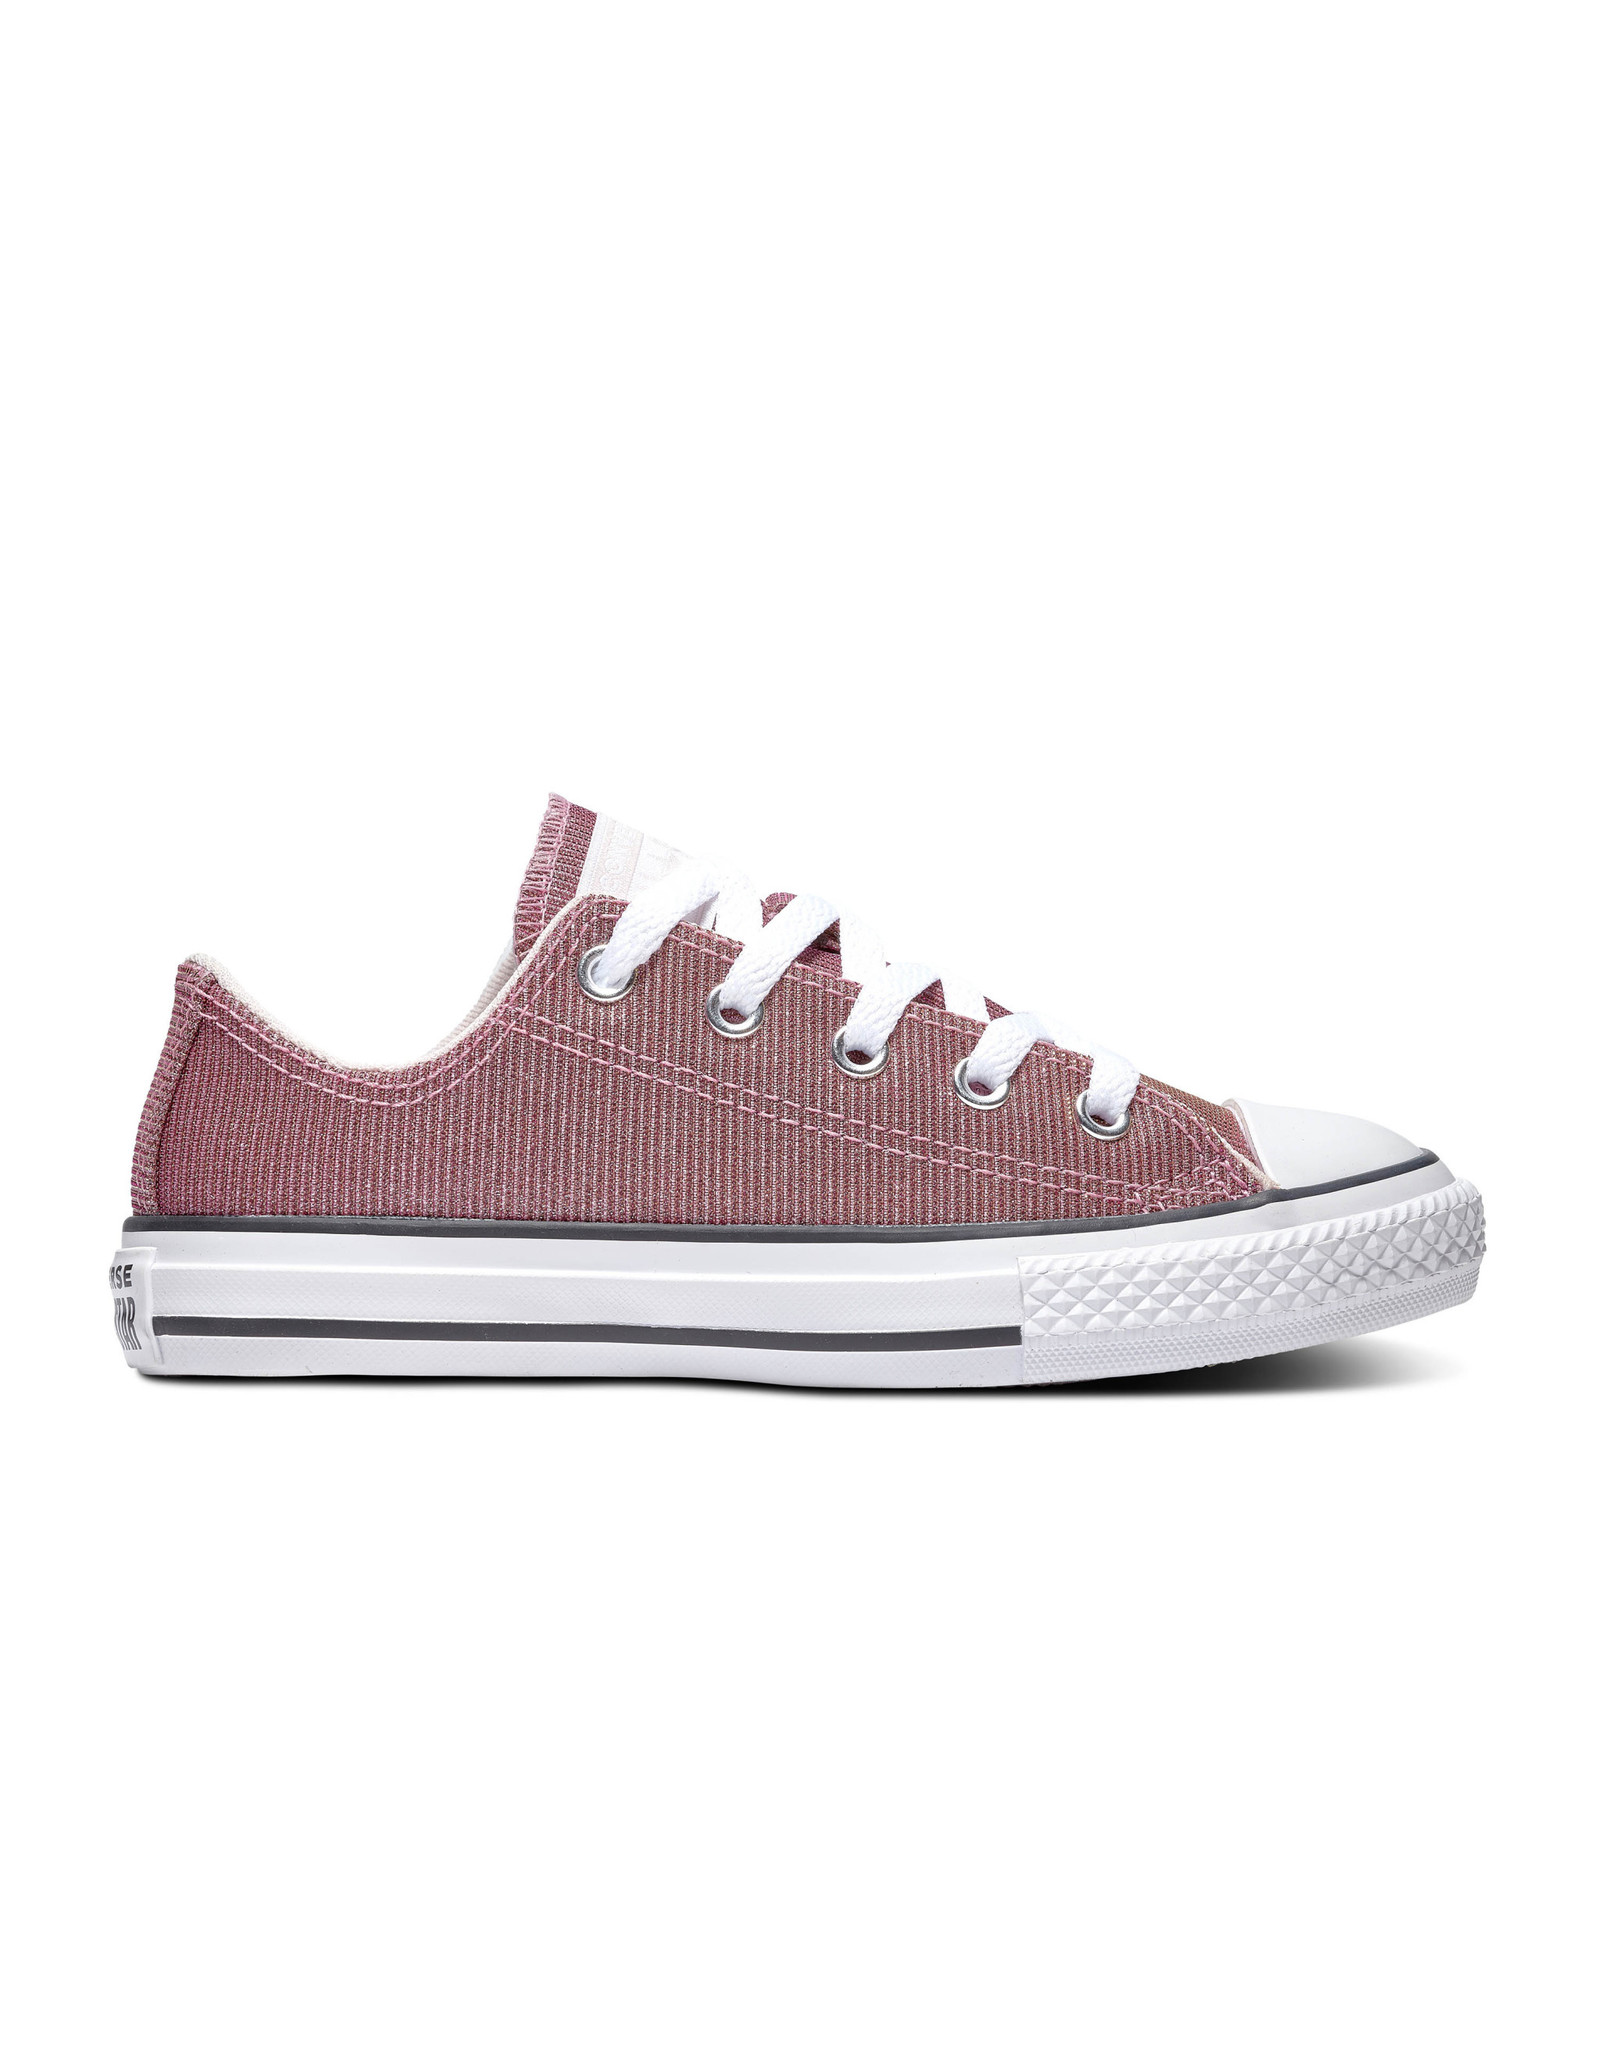 CHUCK TAYLOR ALL STAR OX BARELY ROSE/SILVER/WHITE CZBAS-665101C